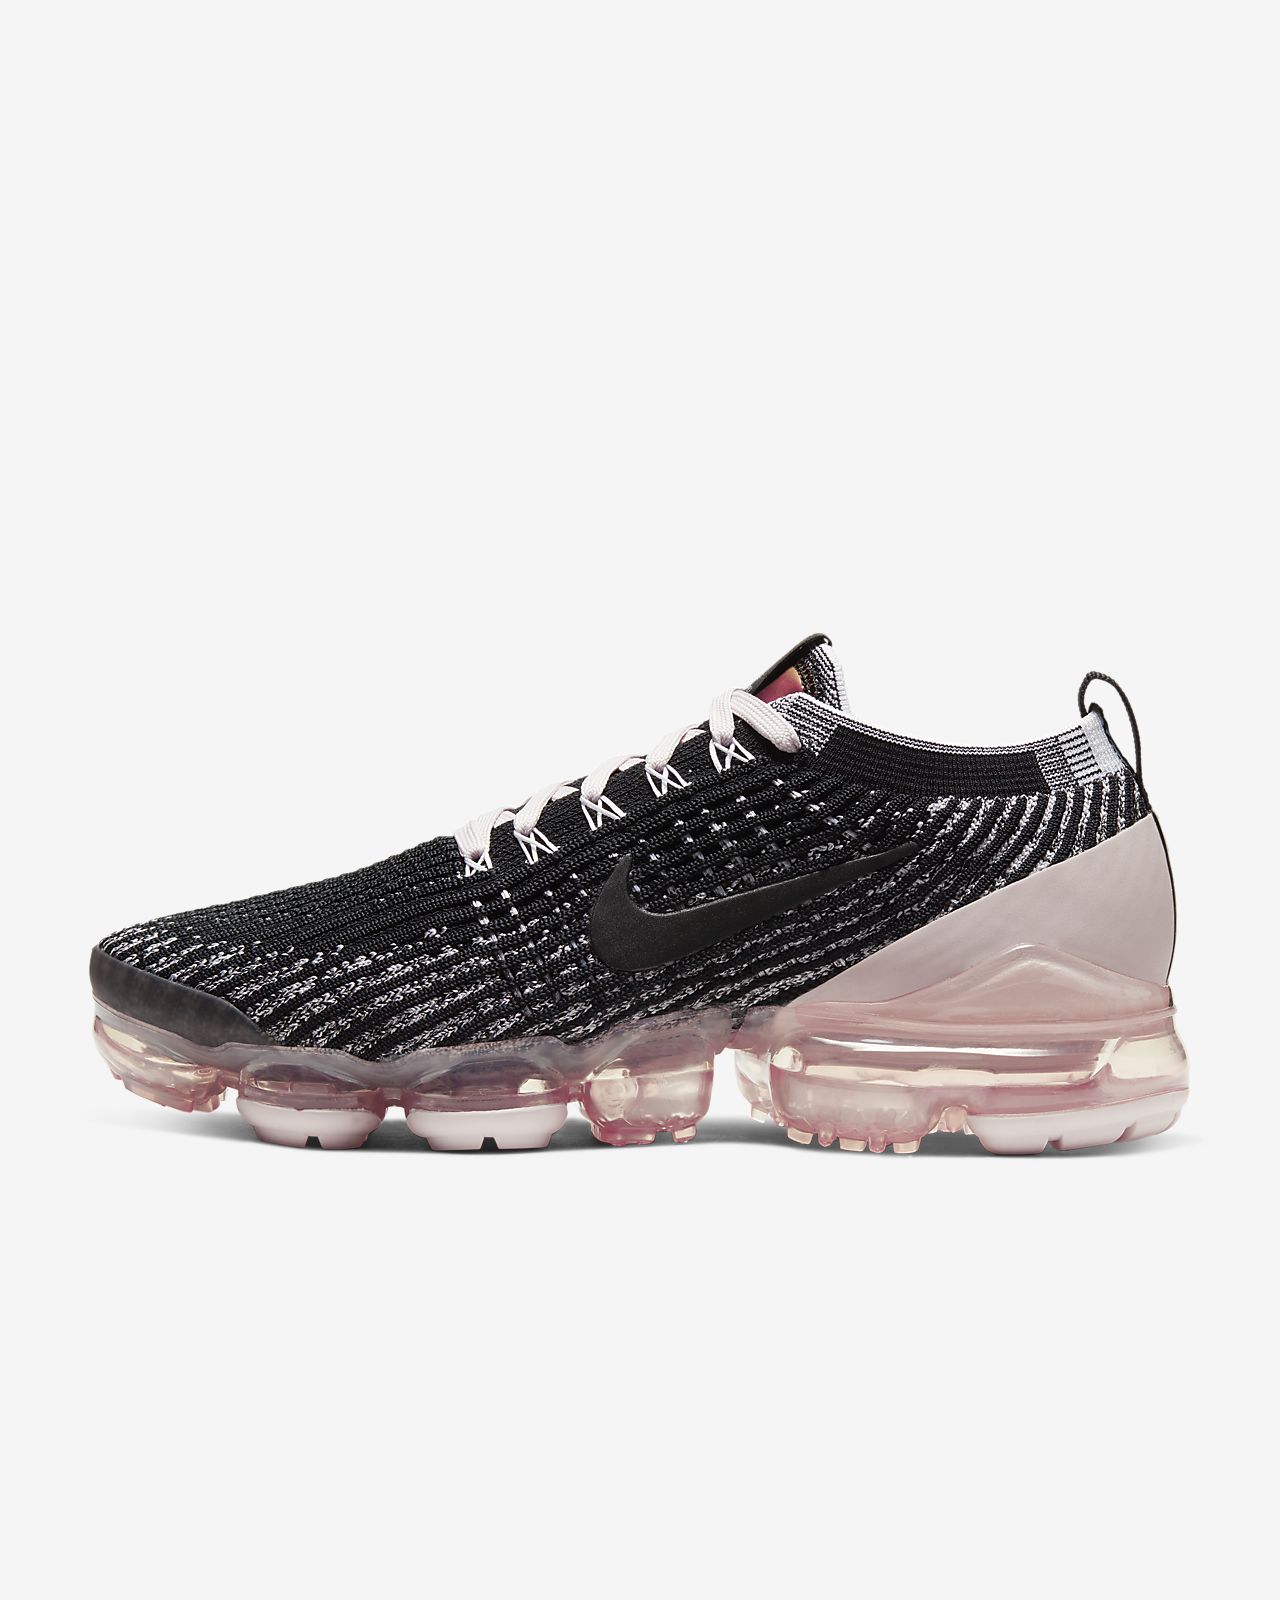 nike vapormax flyknit black and pink